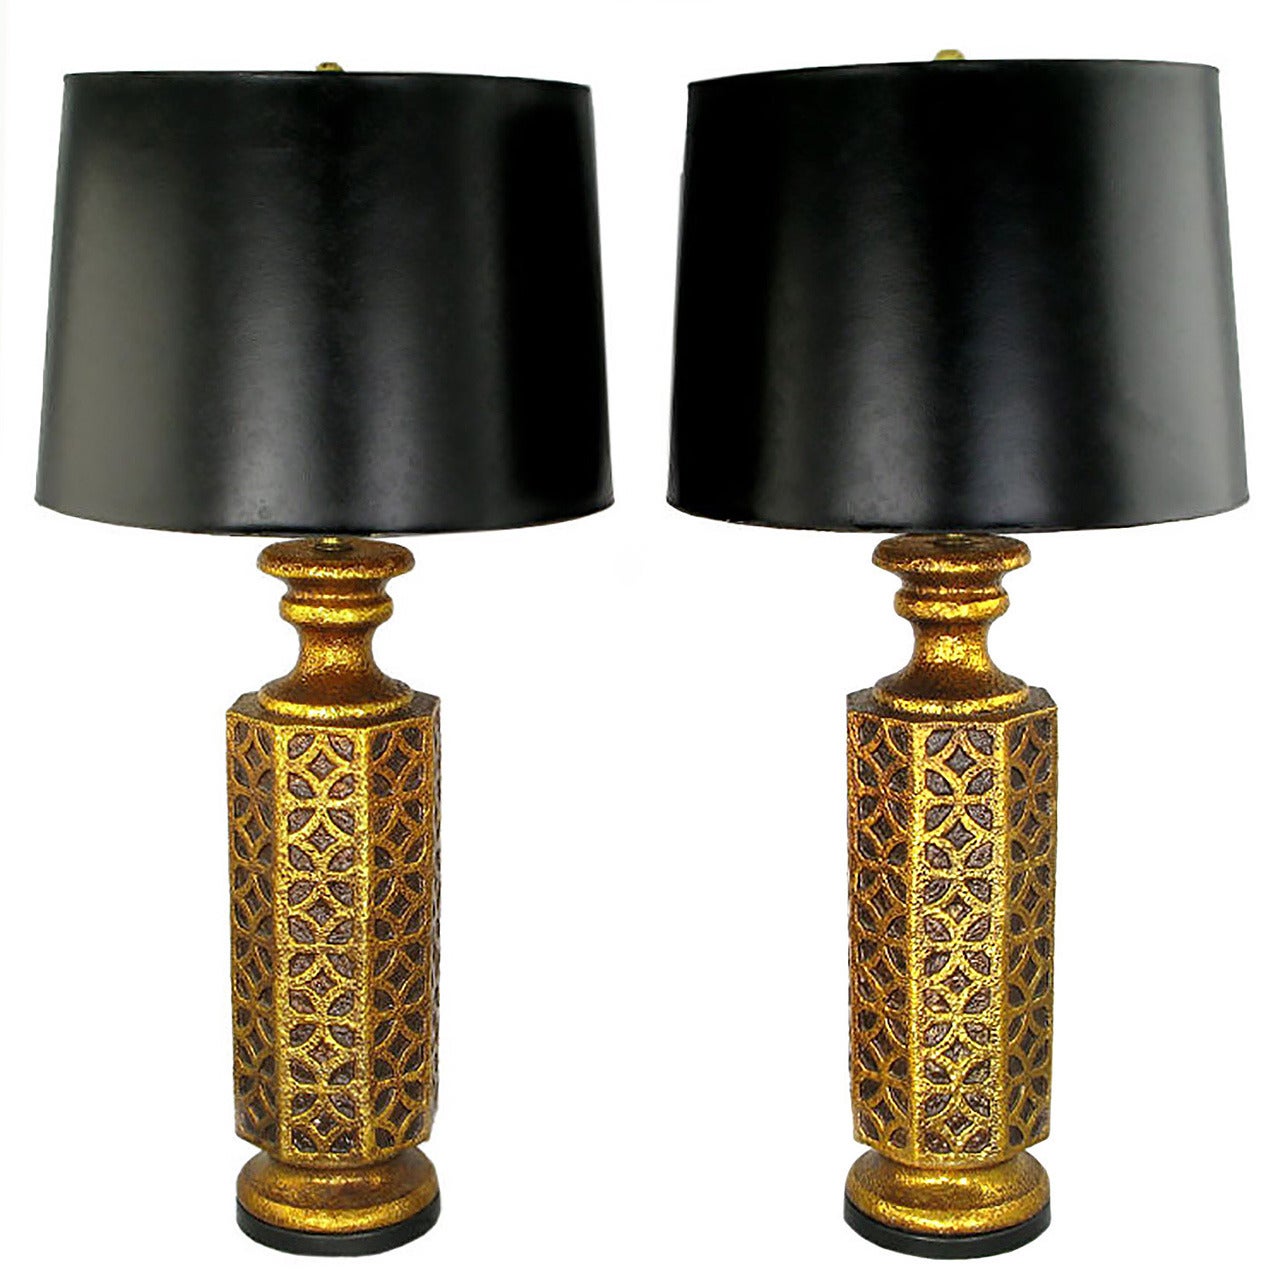 Pair of Moroccan-Style Gilt Arabesques Table Lamps For Sale